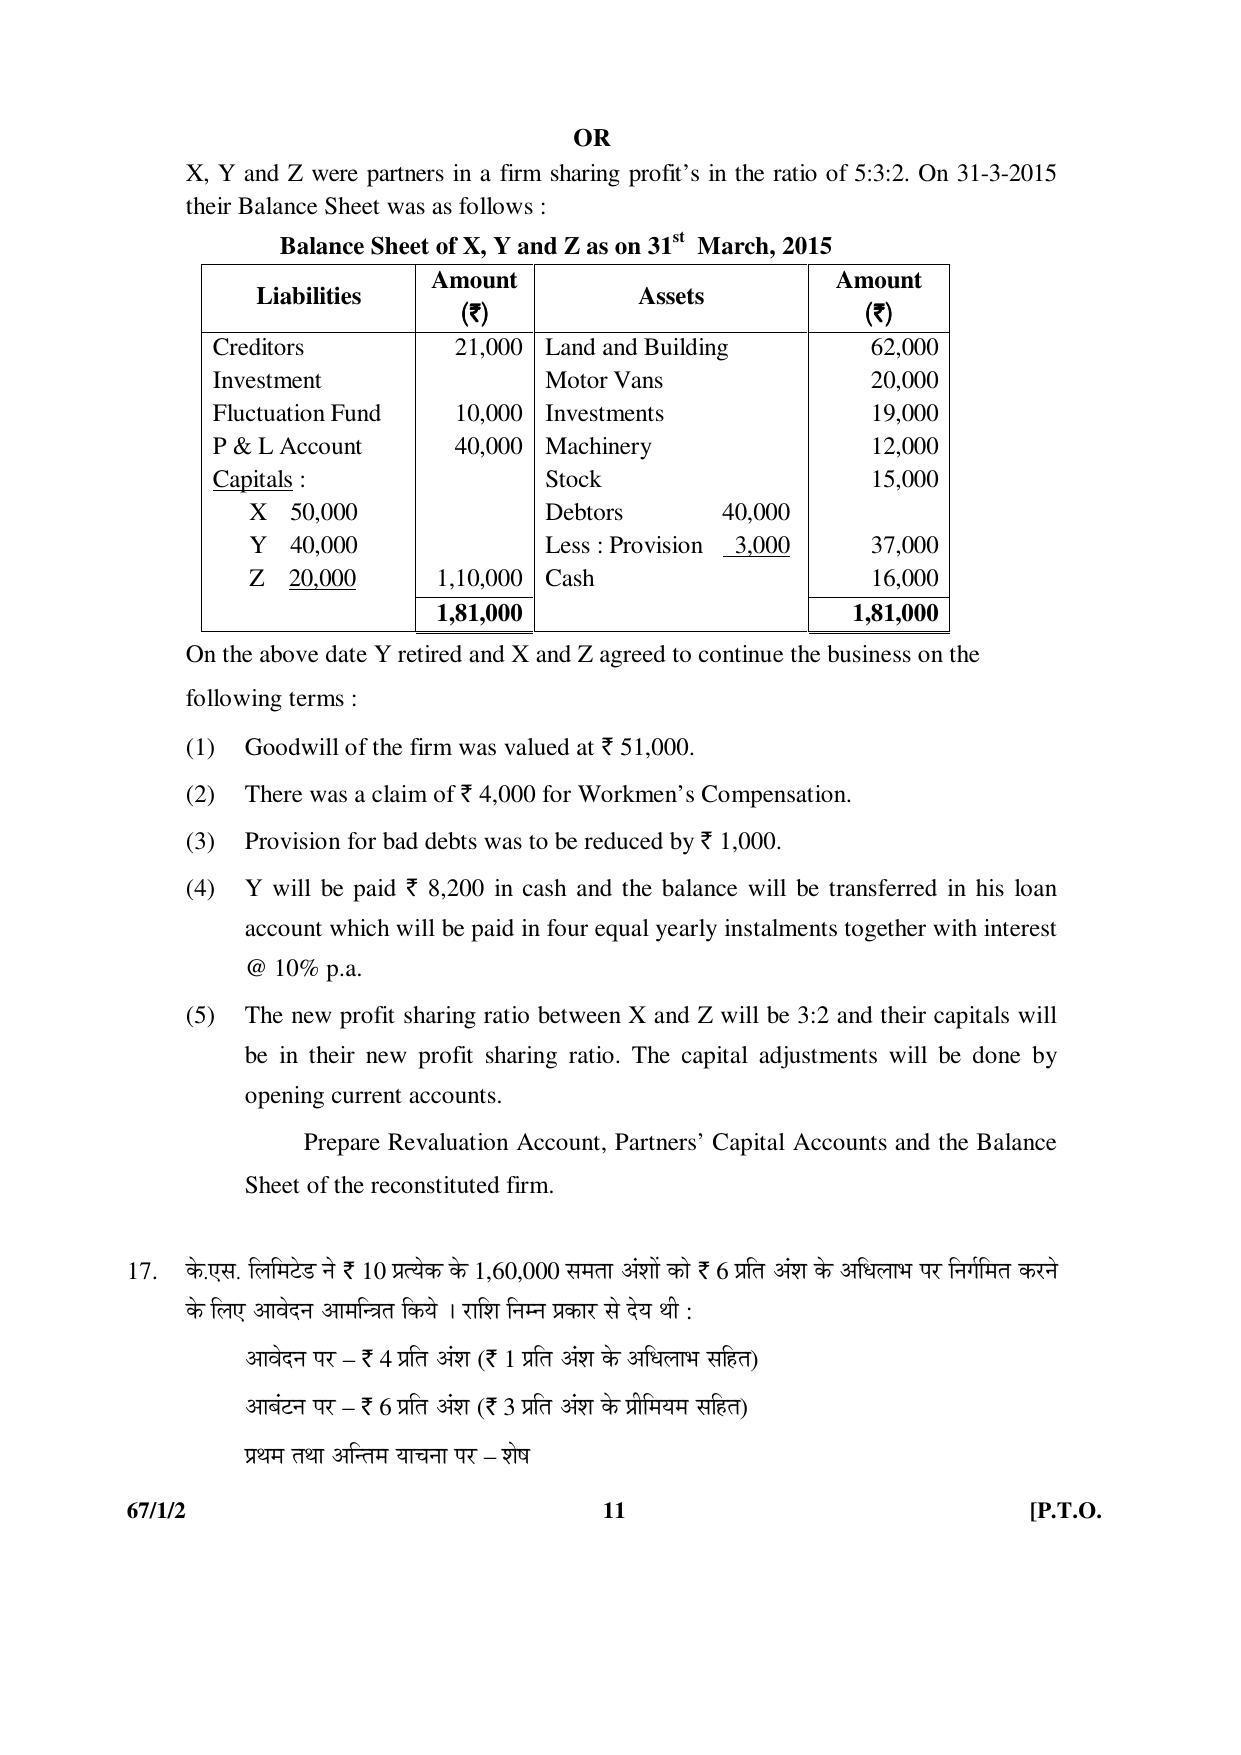 CBSE Class 12 67-1-2 ACCOUNTANCY 2016 Question Paper - Page 11